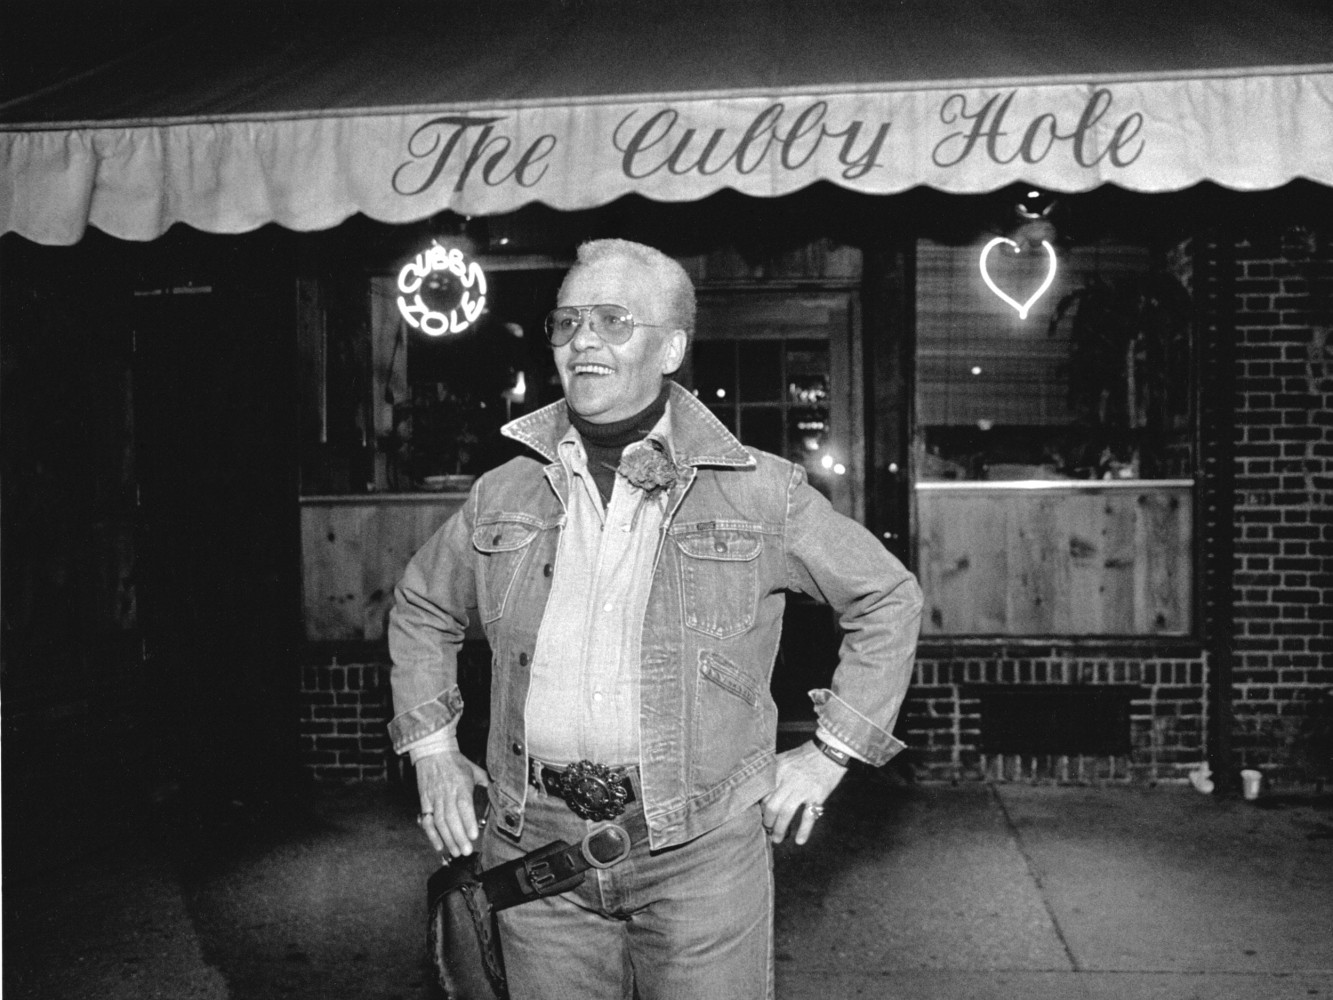 Joan E. Biren
Storm&amp;eacute; DeLarverie at the Cubby Hole, 1986 - printed 2019
Pigment inkjet print
9 x 11 inches&amp;nbsp;